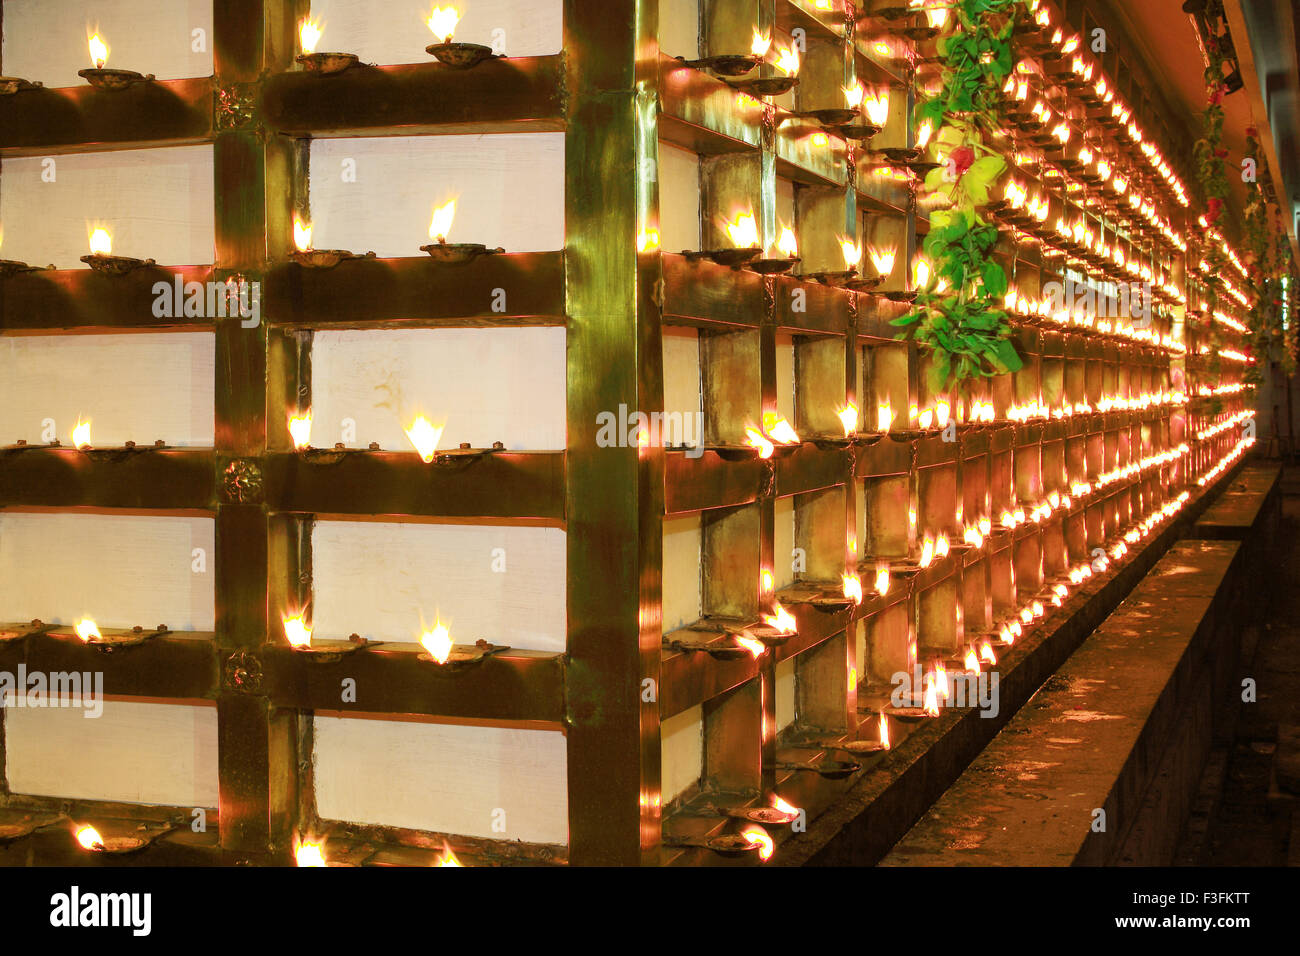 Temple lamps india stock photography and - Alamy